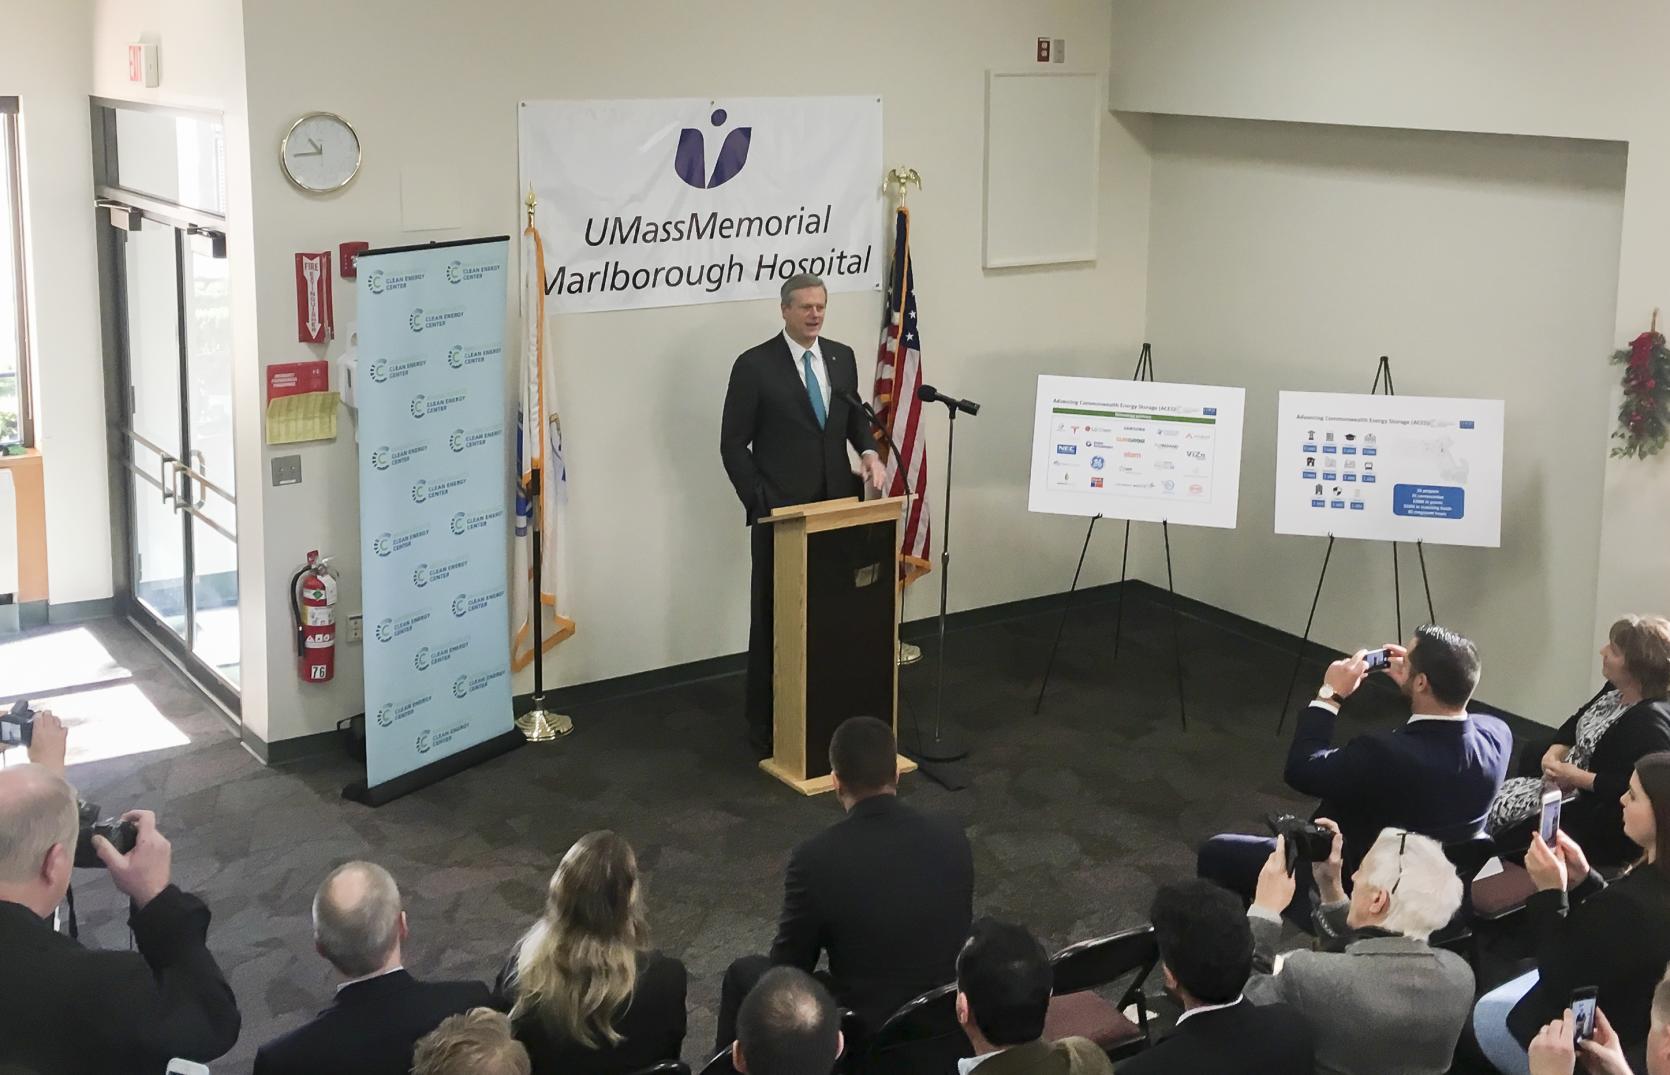 Governor Baker announcing $20 million for energy storage projects.